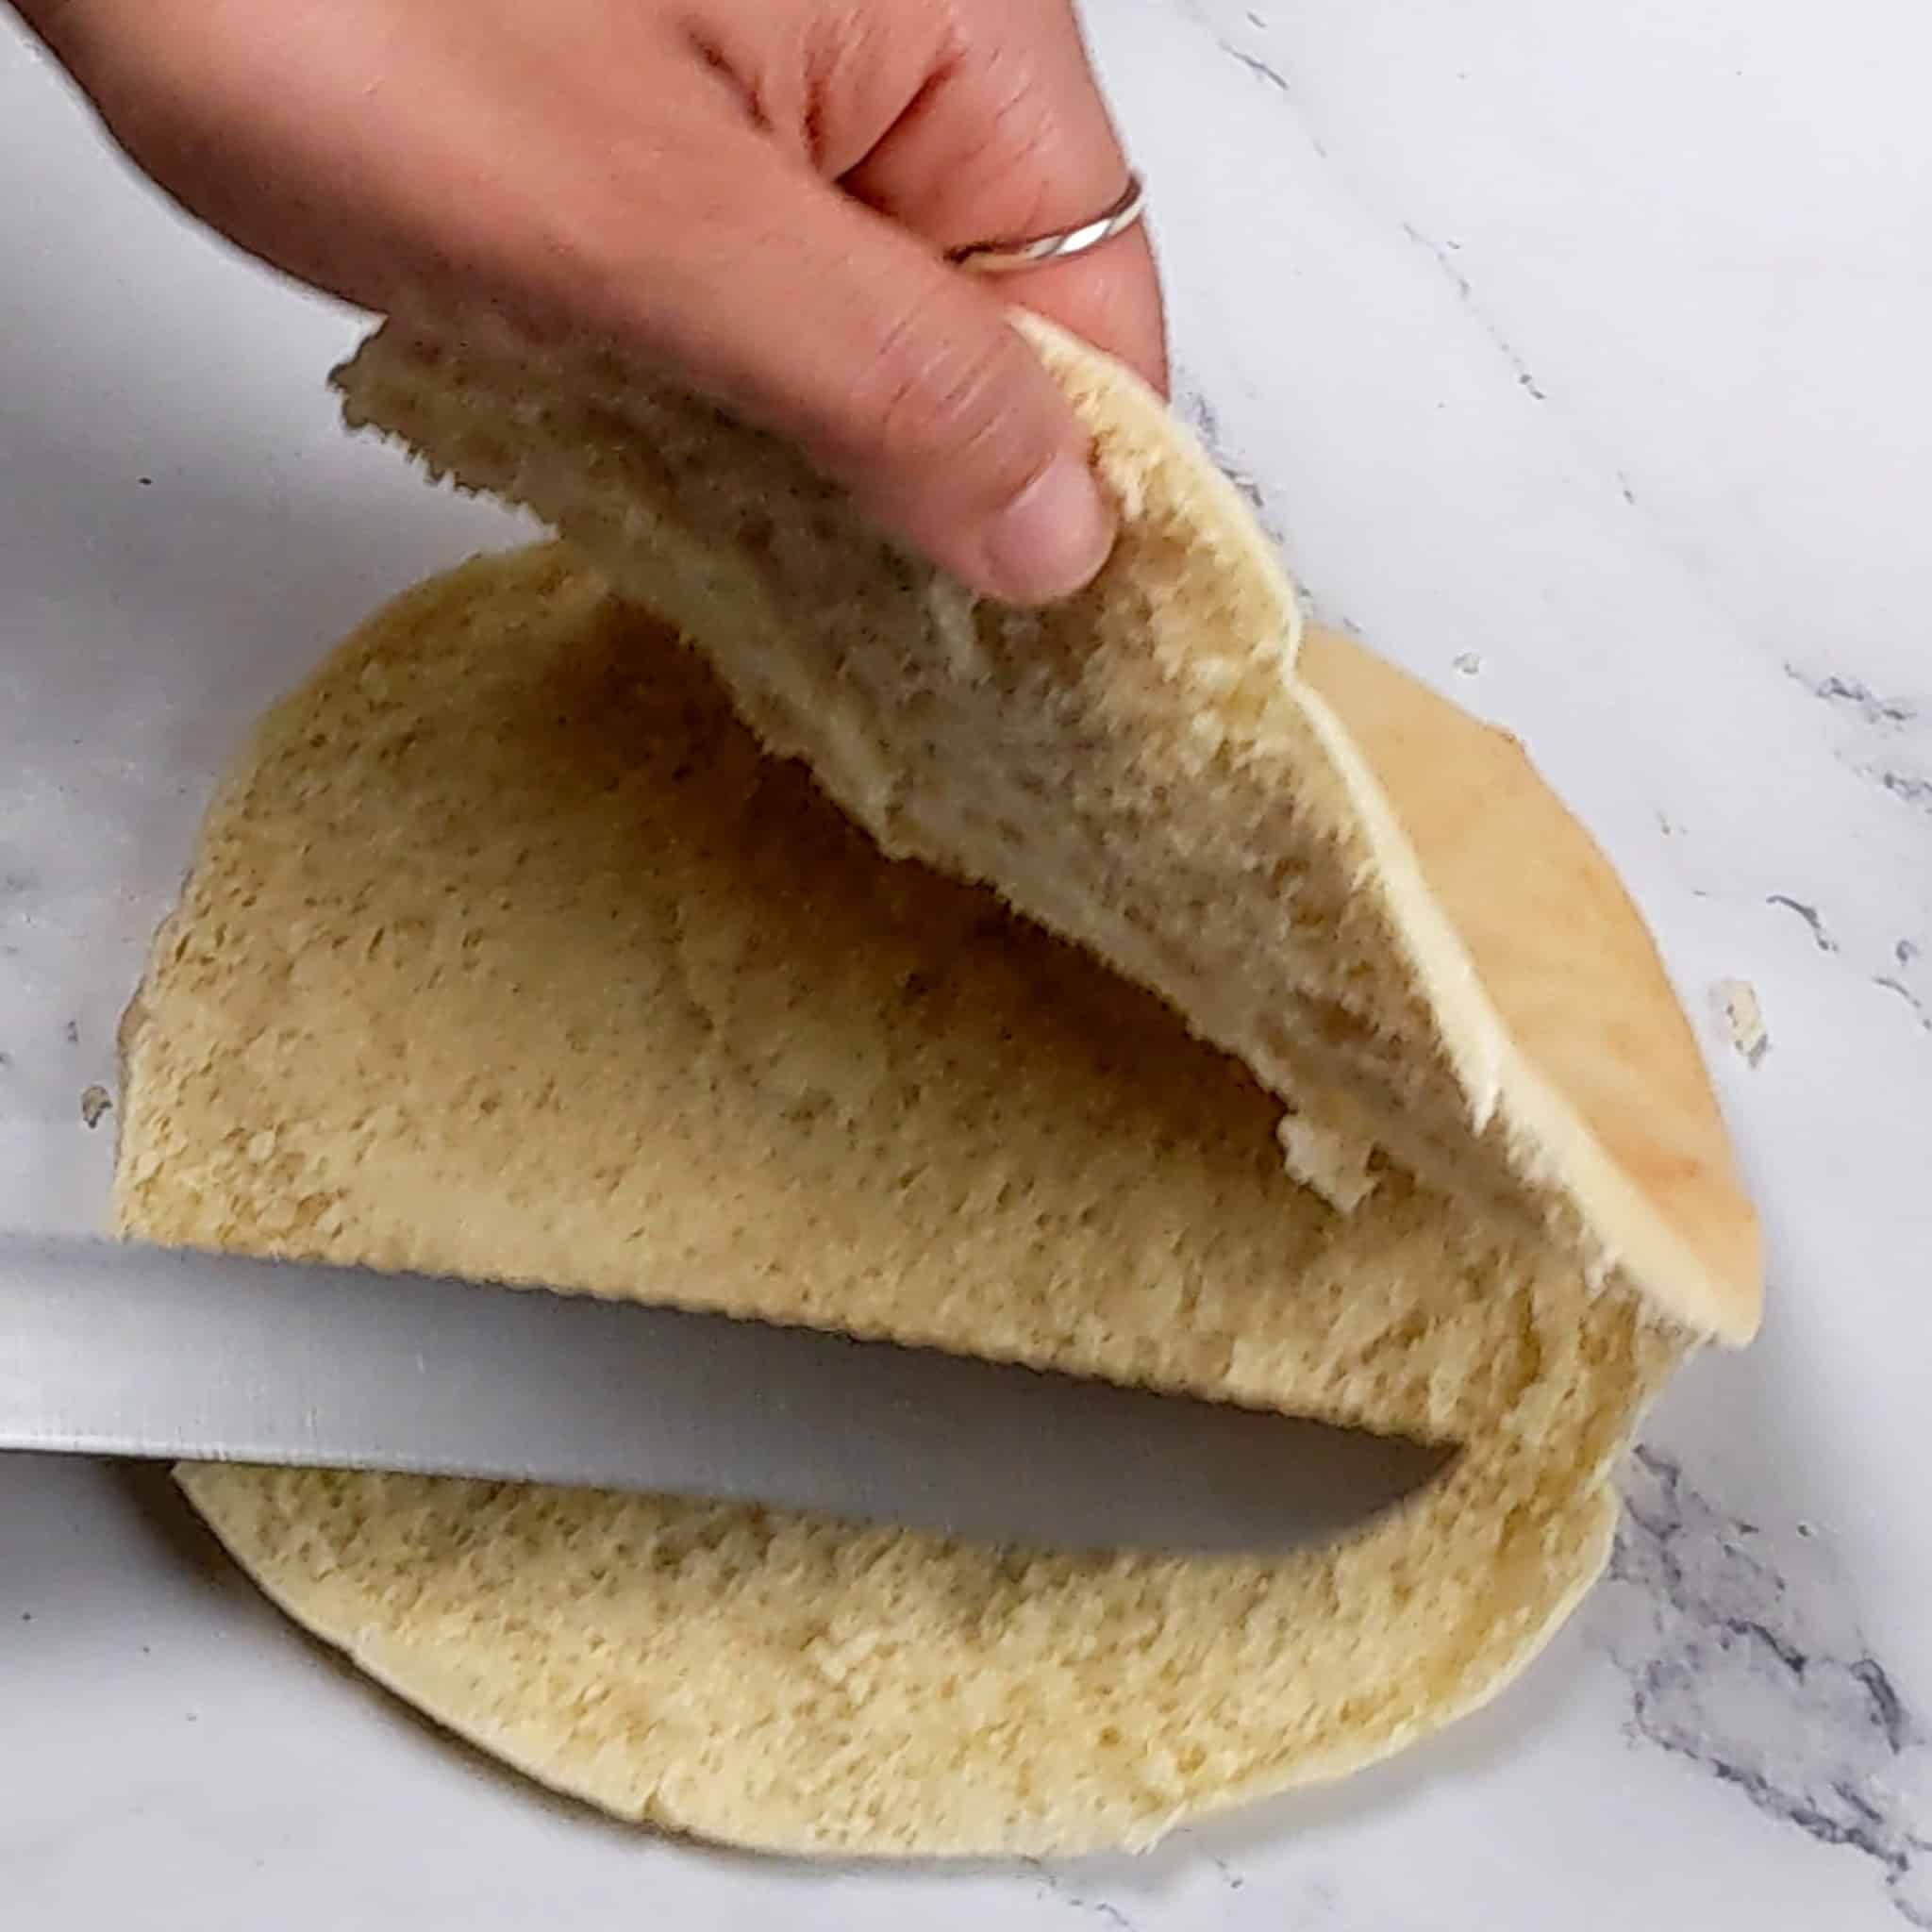 the top layer of the pita bread being pulled back while the knife finishes cutting the pita in half.